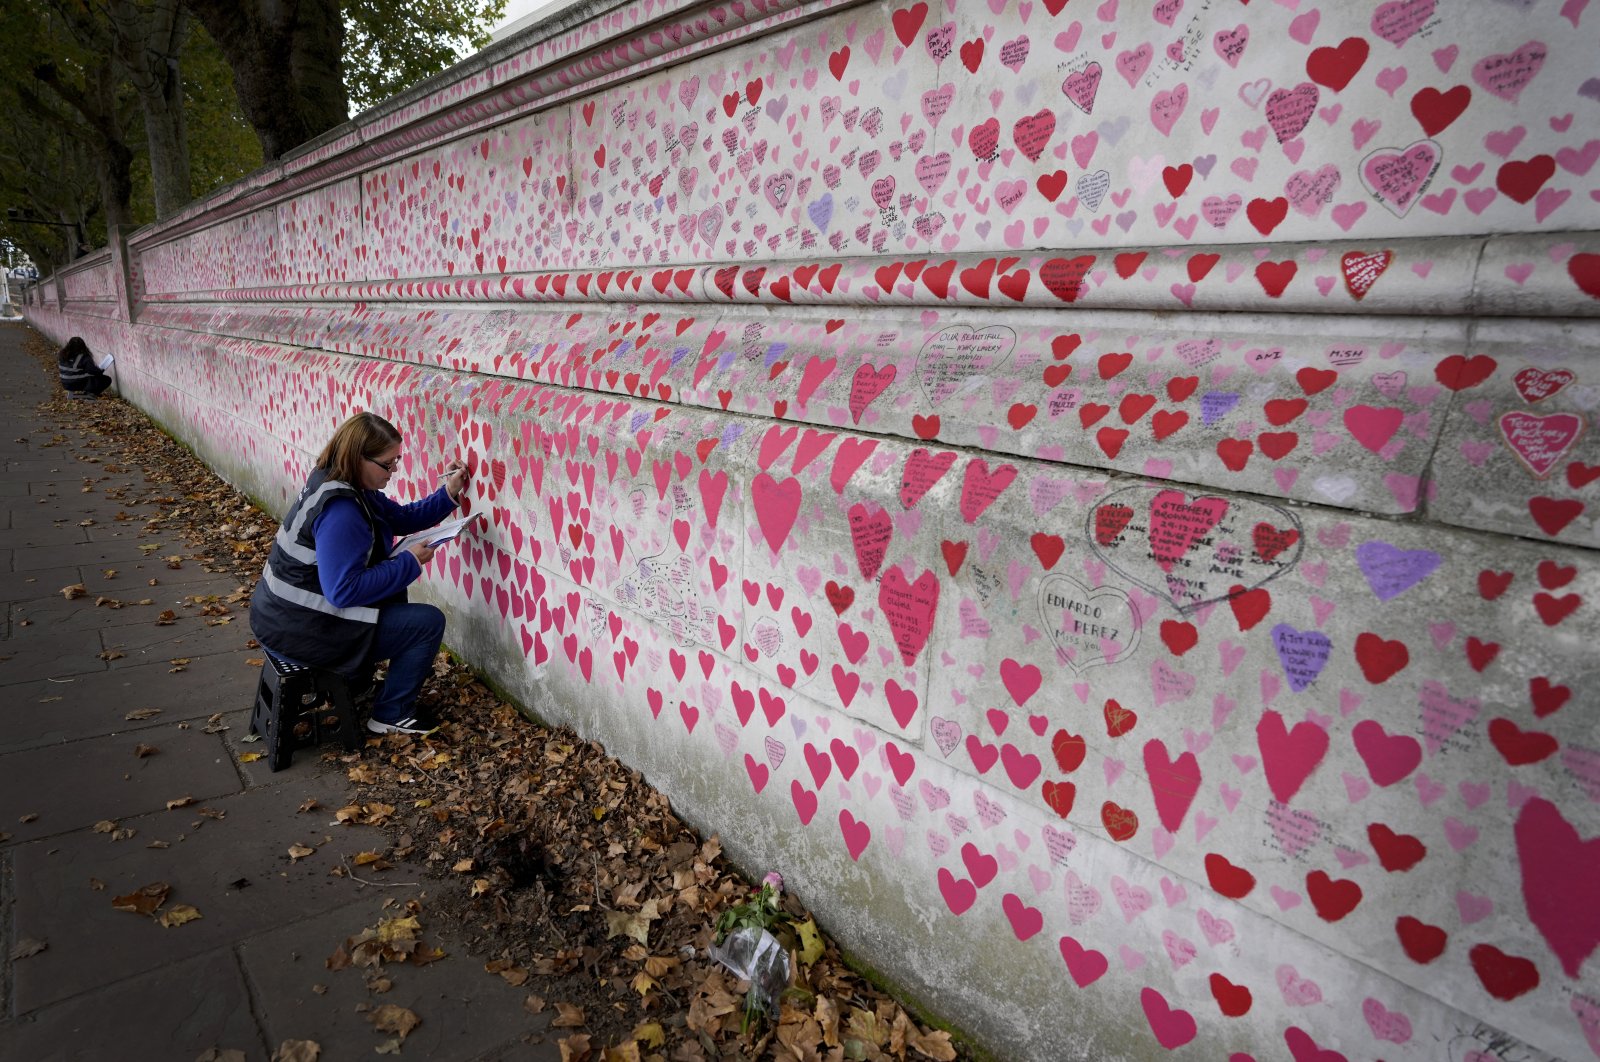 Volunteer Amanda Herring who lost her brother Mark to COVID-19, writes inscriptions on the COVID-19 memorial wall in Westminster in London, U.K., Oct. 15, 2021. (AP Photo)